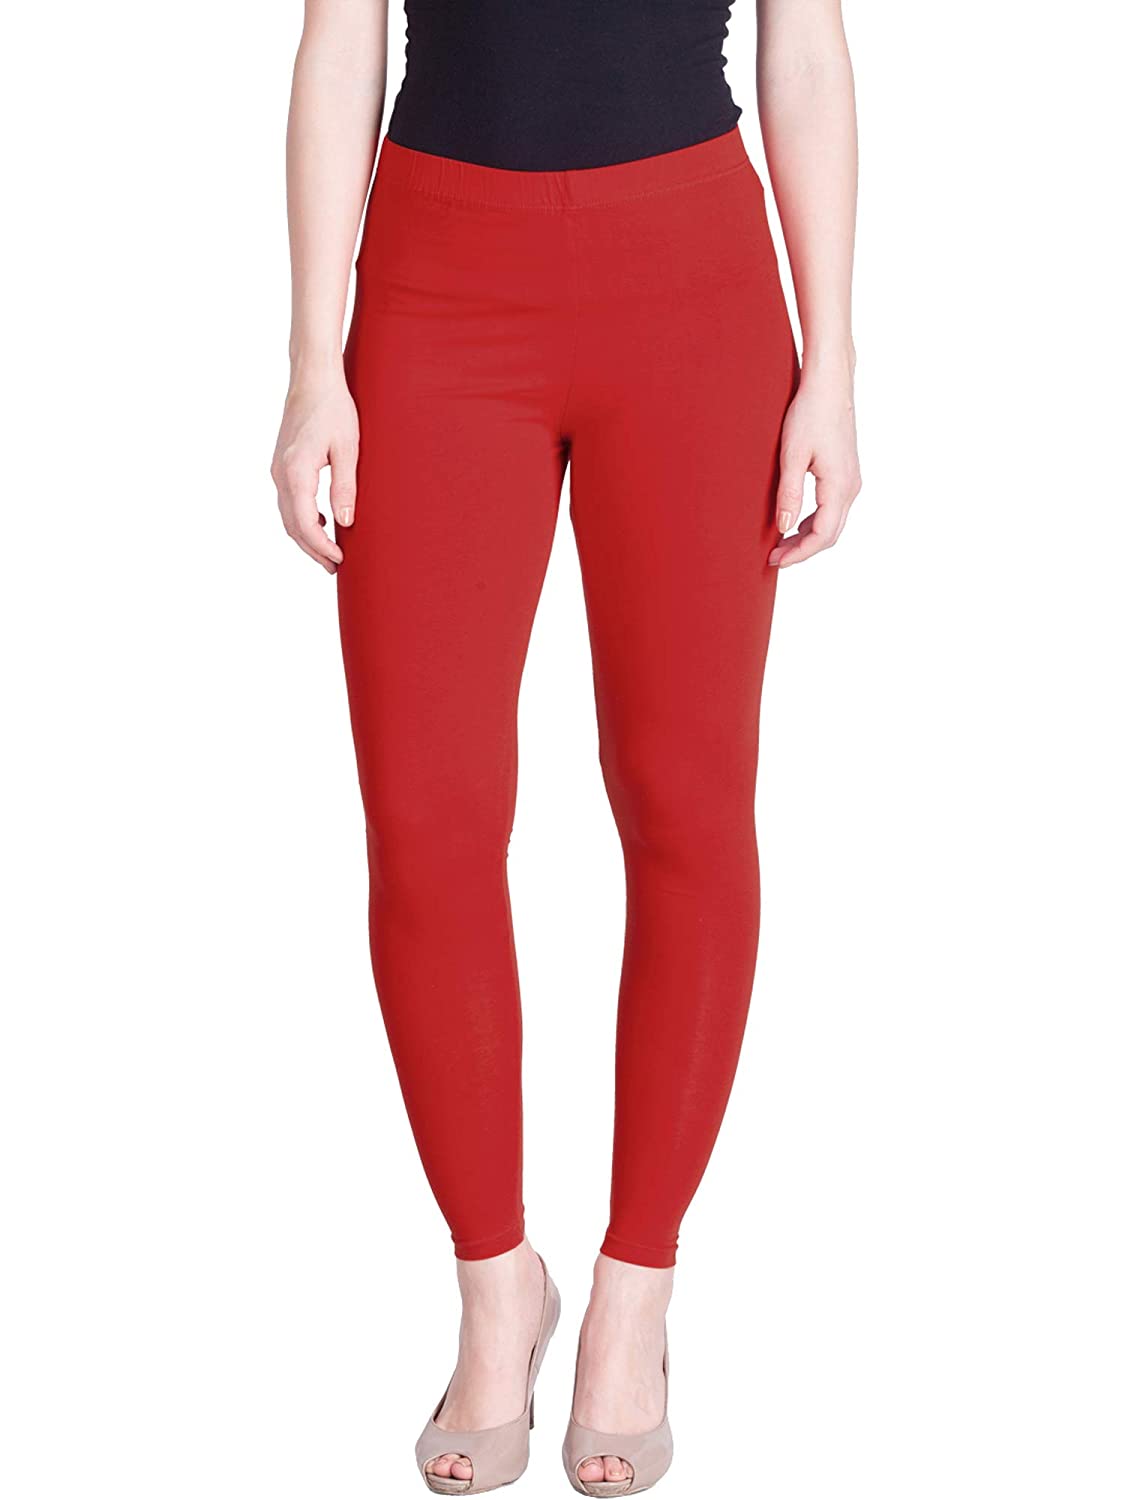 Lux Lyra Ankle Length Red Leggings free Size for Woman - Stilento